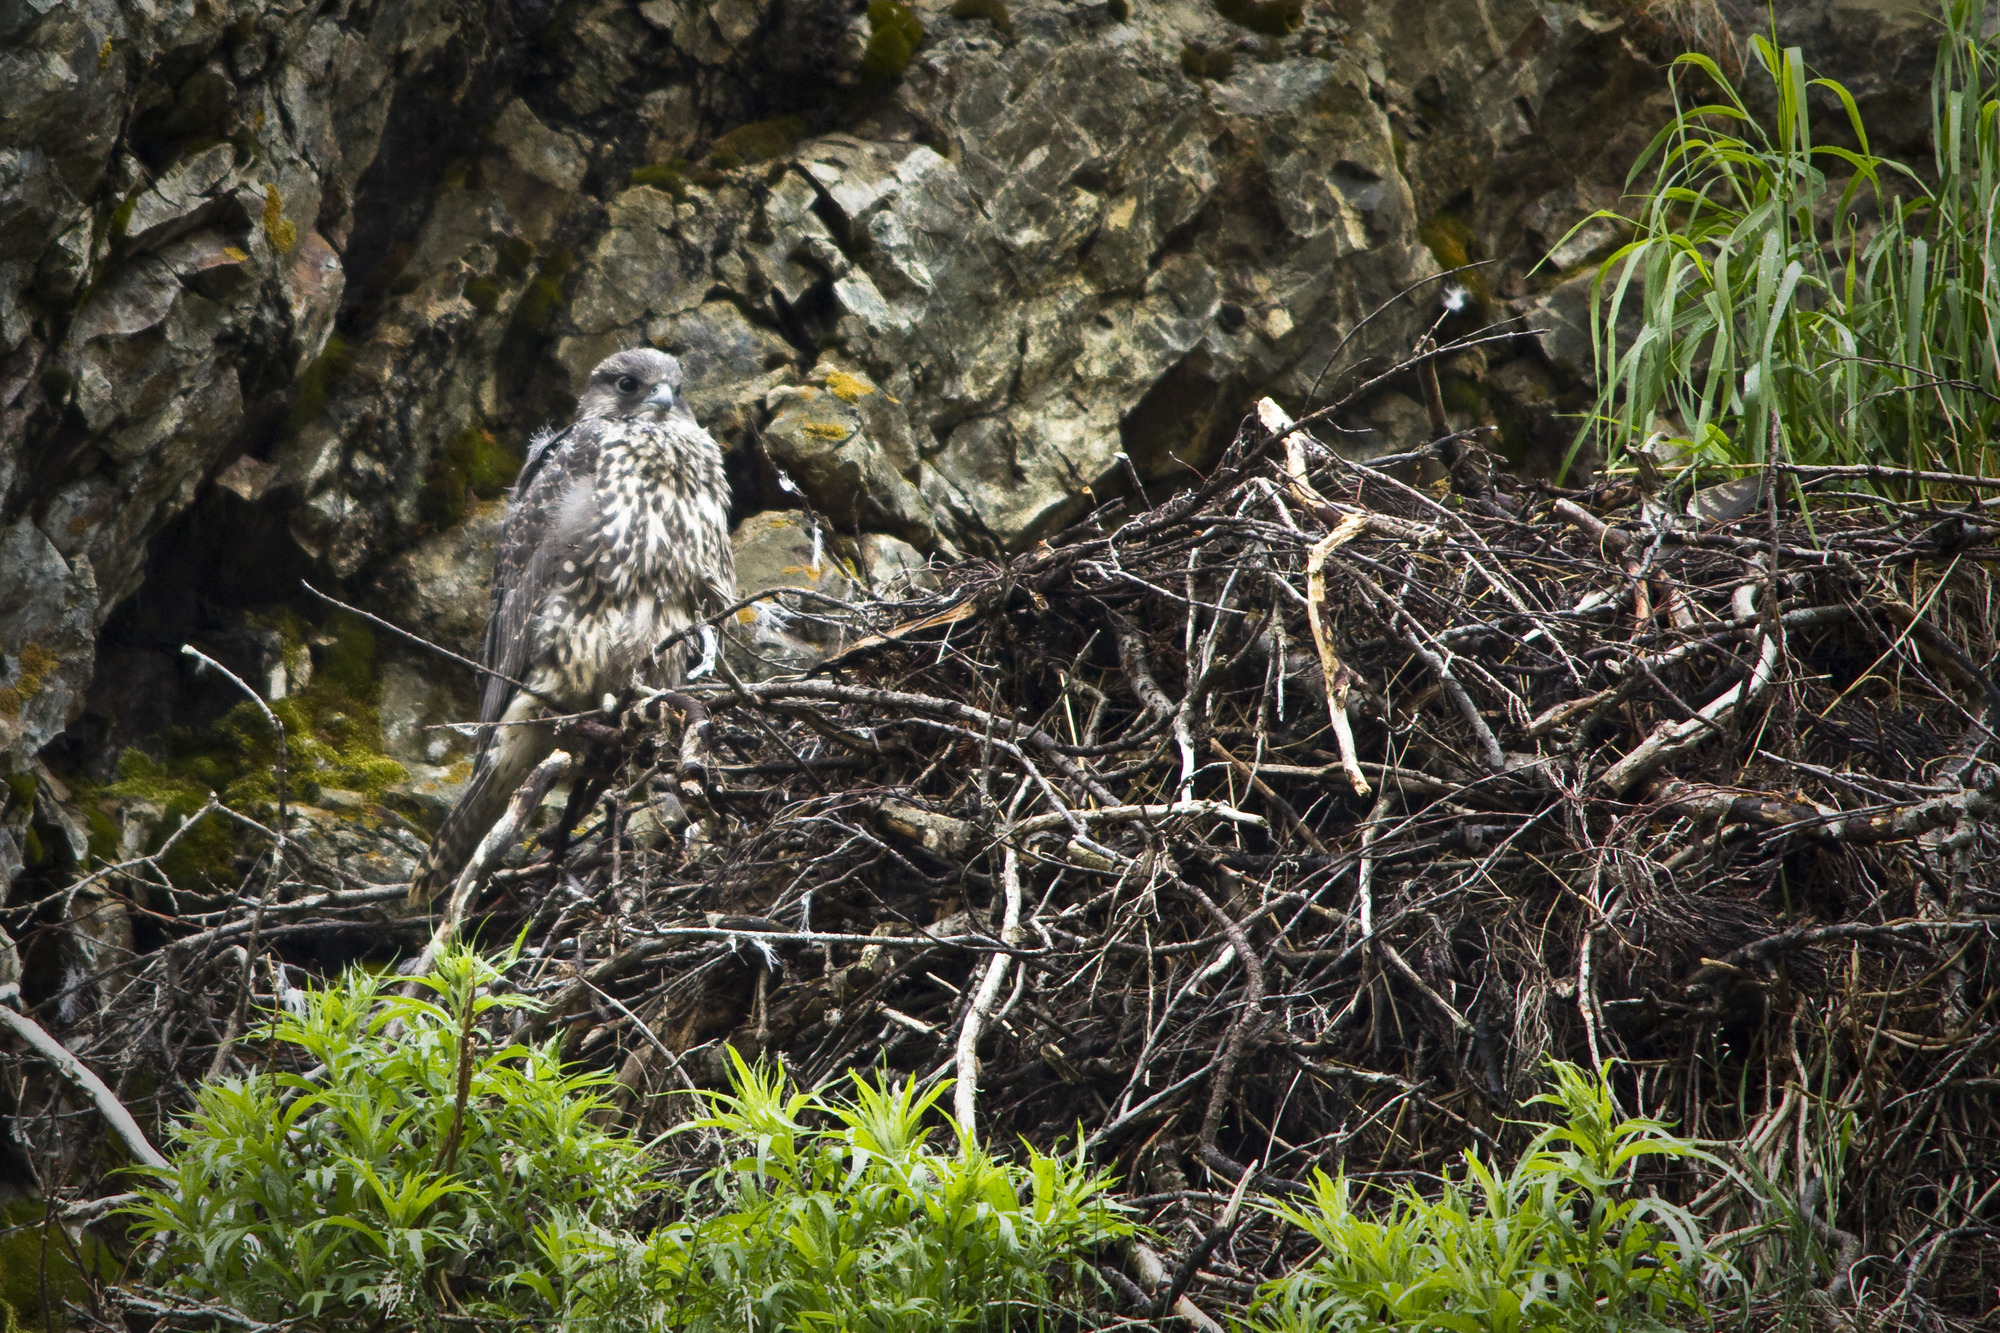 A young gyrfalcon perched by its nest